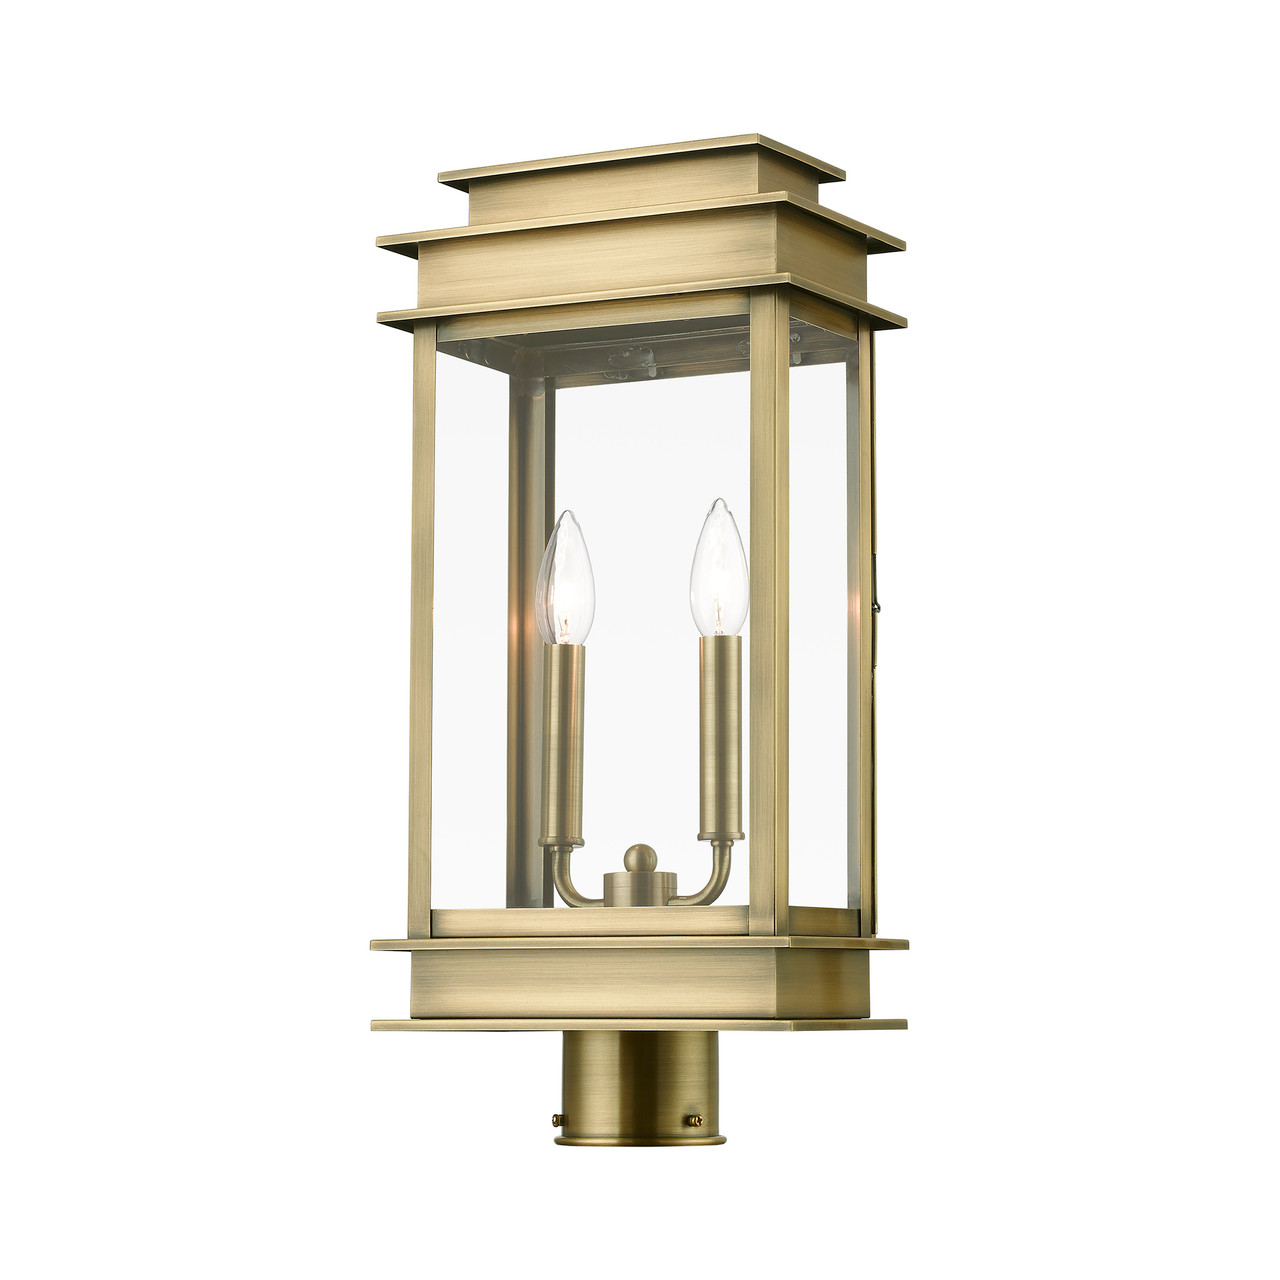 LIVEX LIGHTING 2017-01 2 Light Antique Brass with Polished Chrome Stainless Steel Reflector Outdoor Large Post Top Lantern